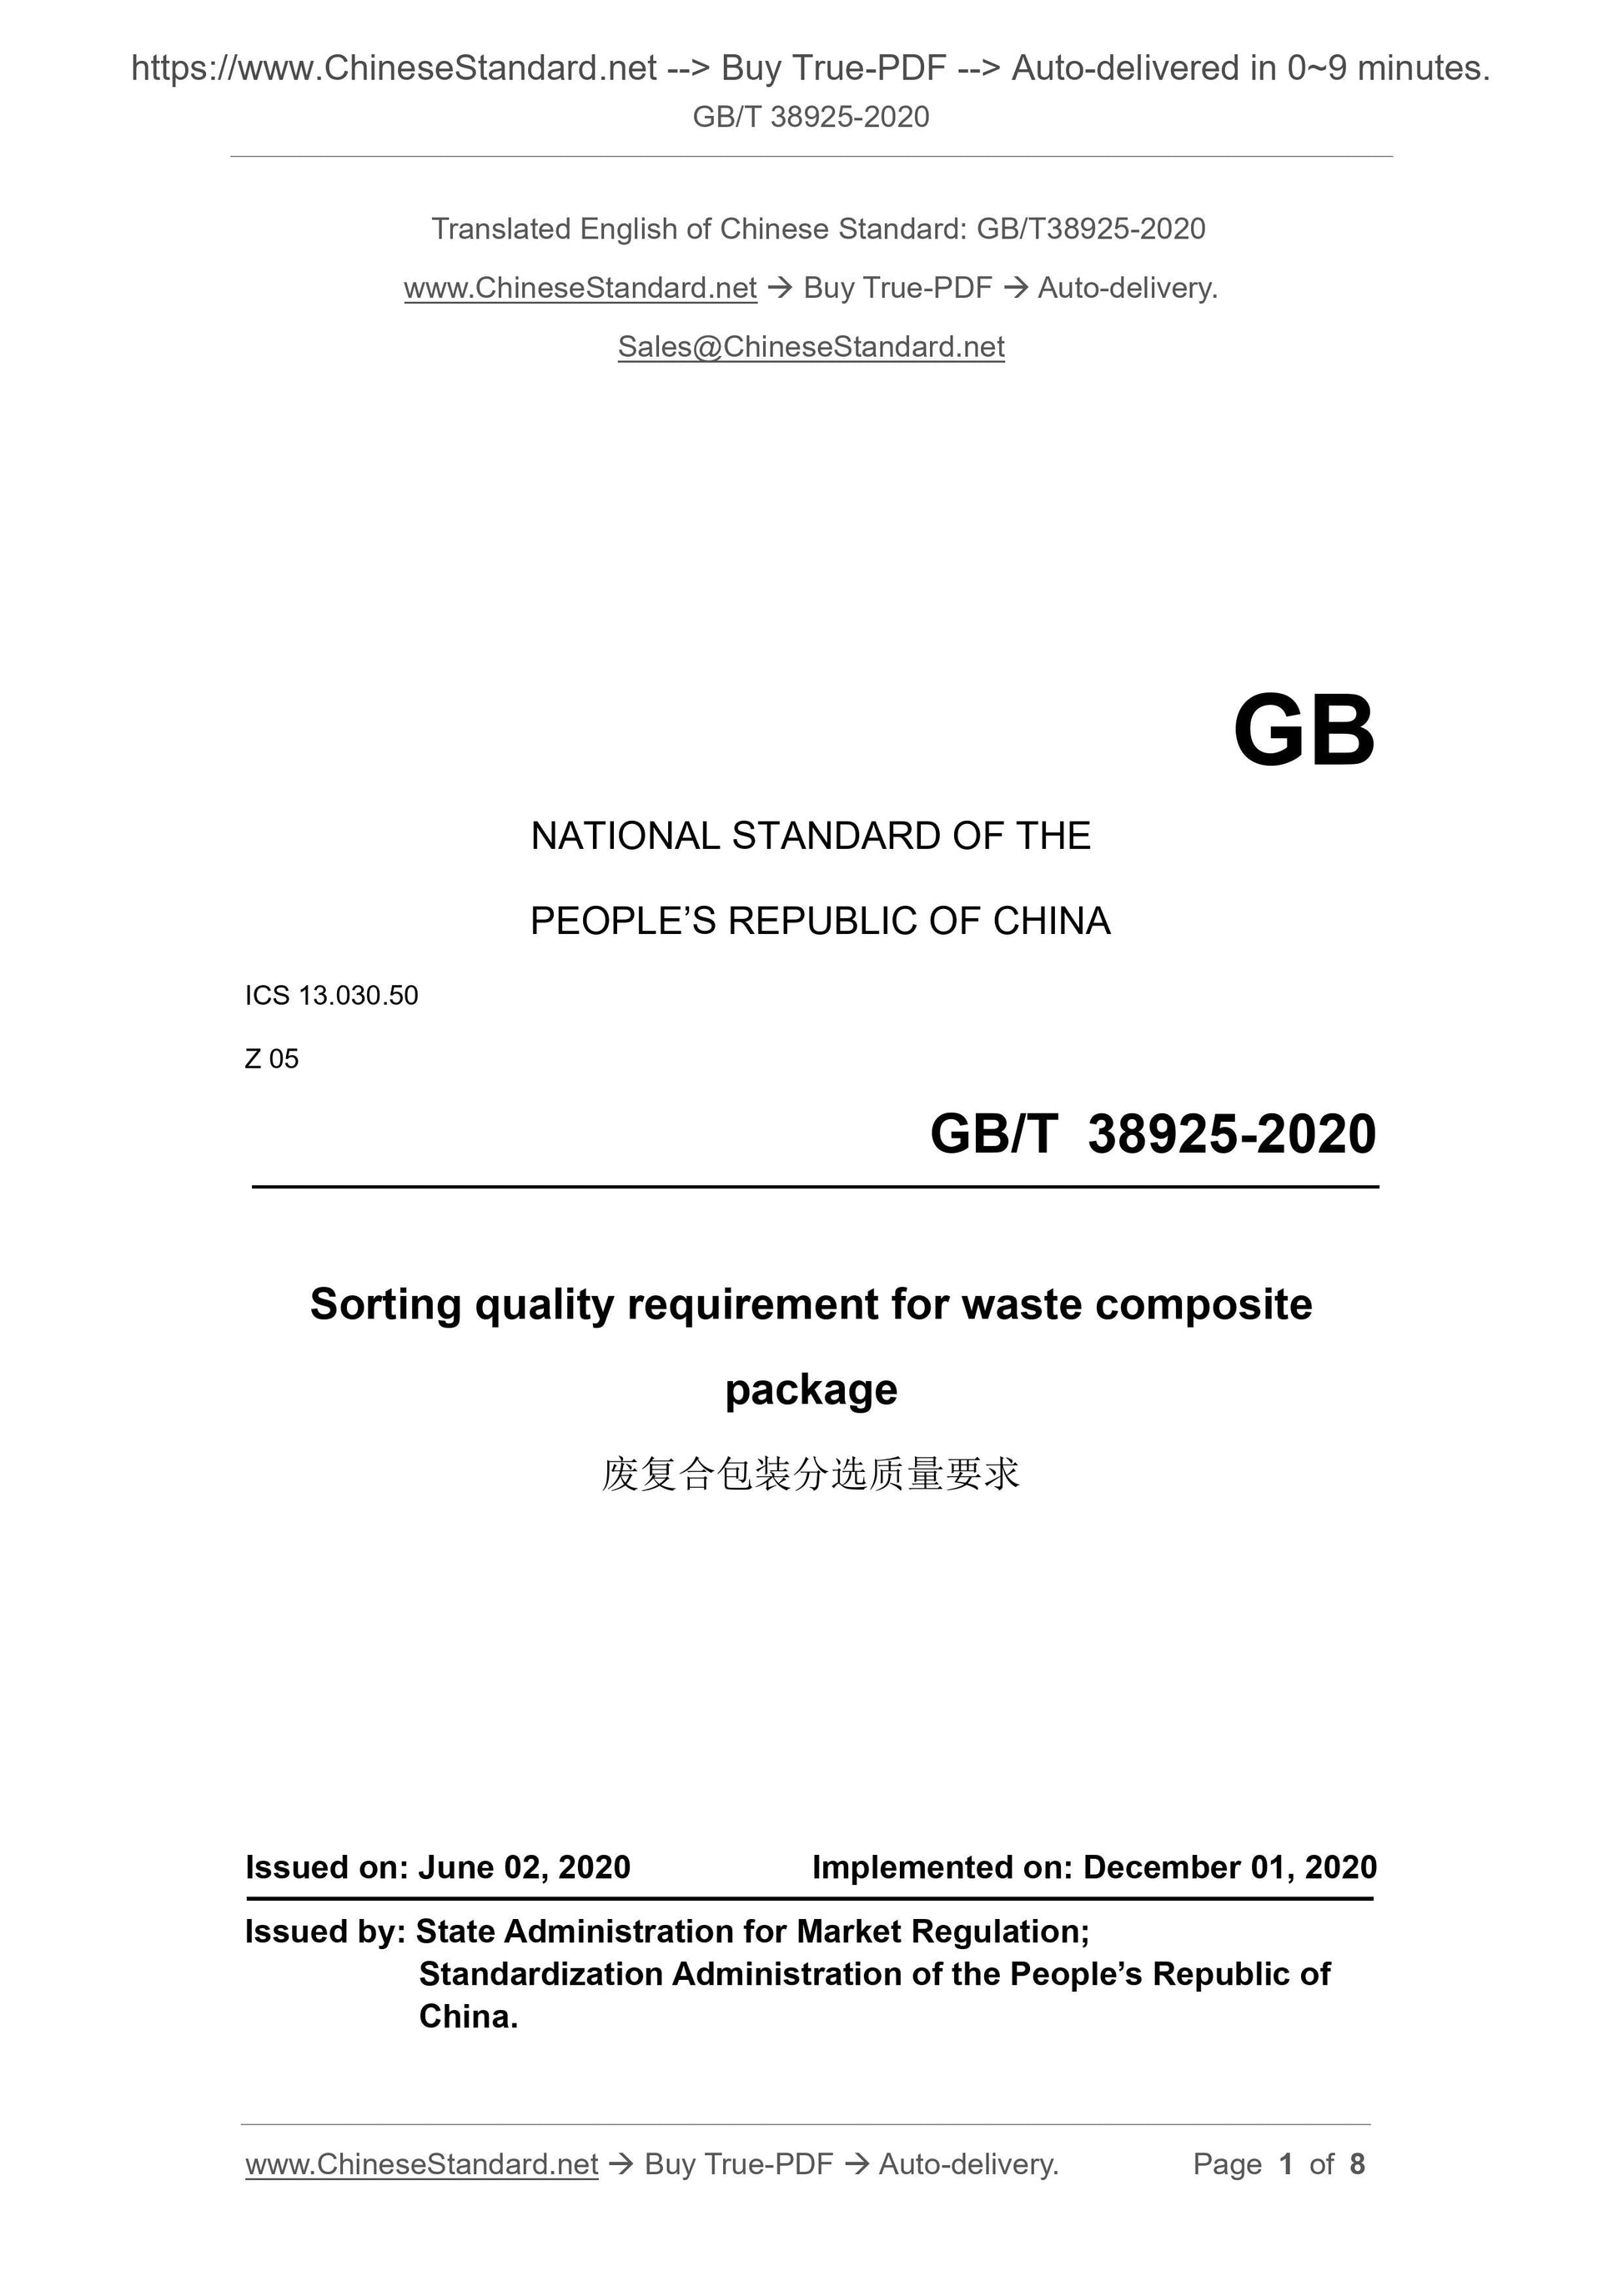 GB/T 38925-2020 Page 1